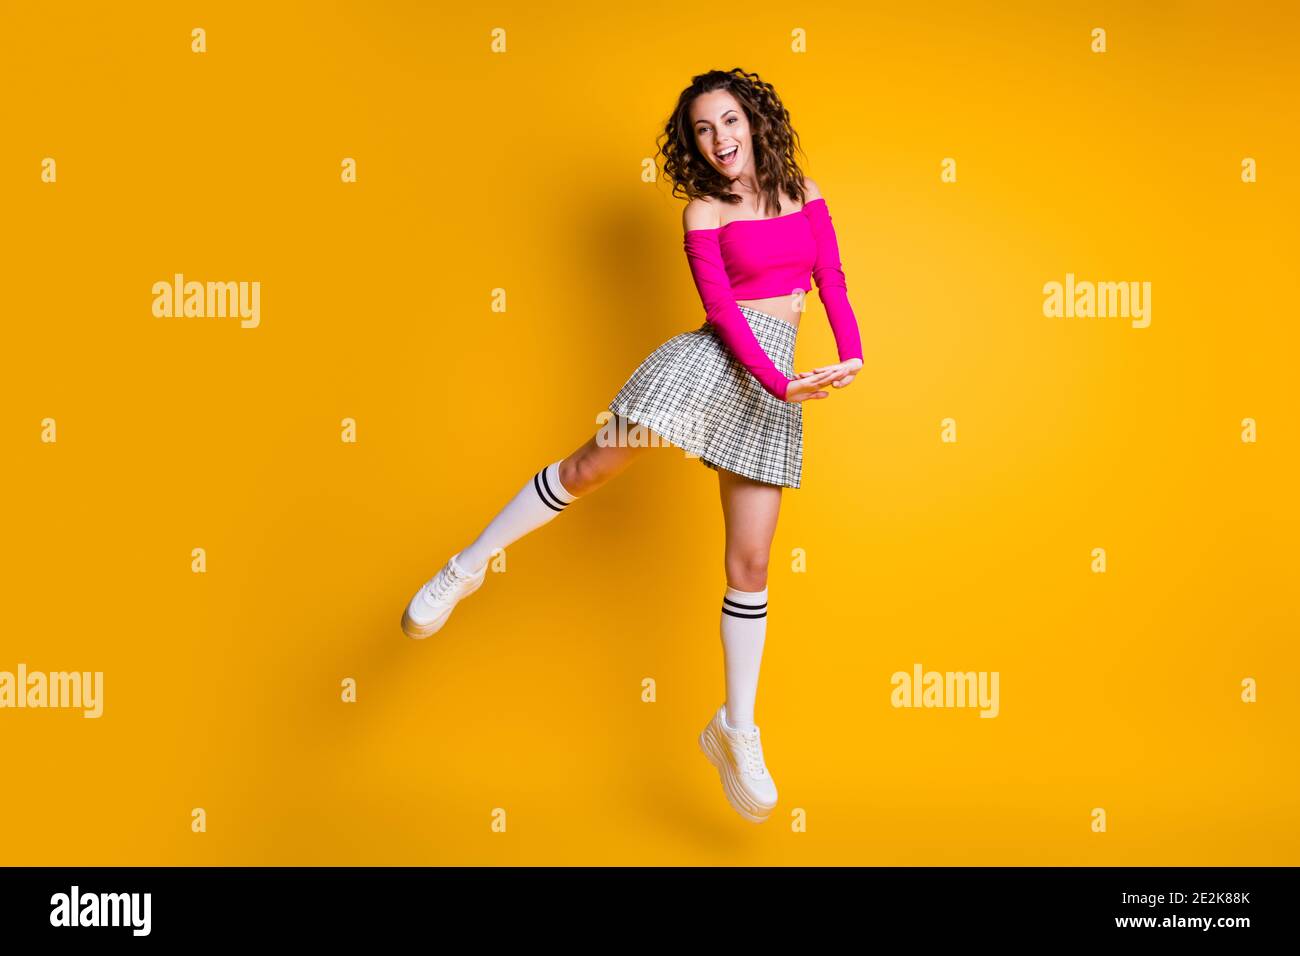 Photo portrait of girl happily jumping up holding hands together wearing pink crop-top plaid skirt knee-high socks white trainers isolated on vivid Stock Photo